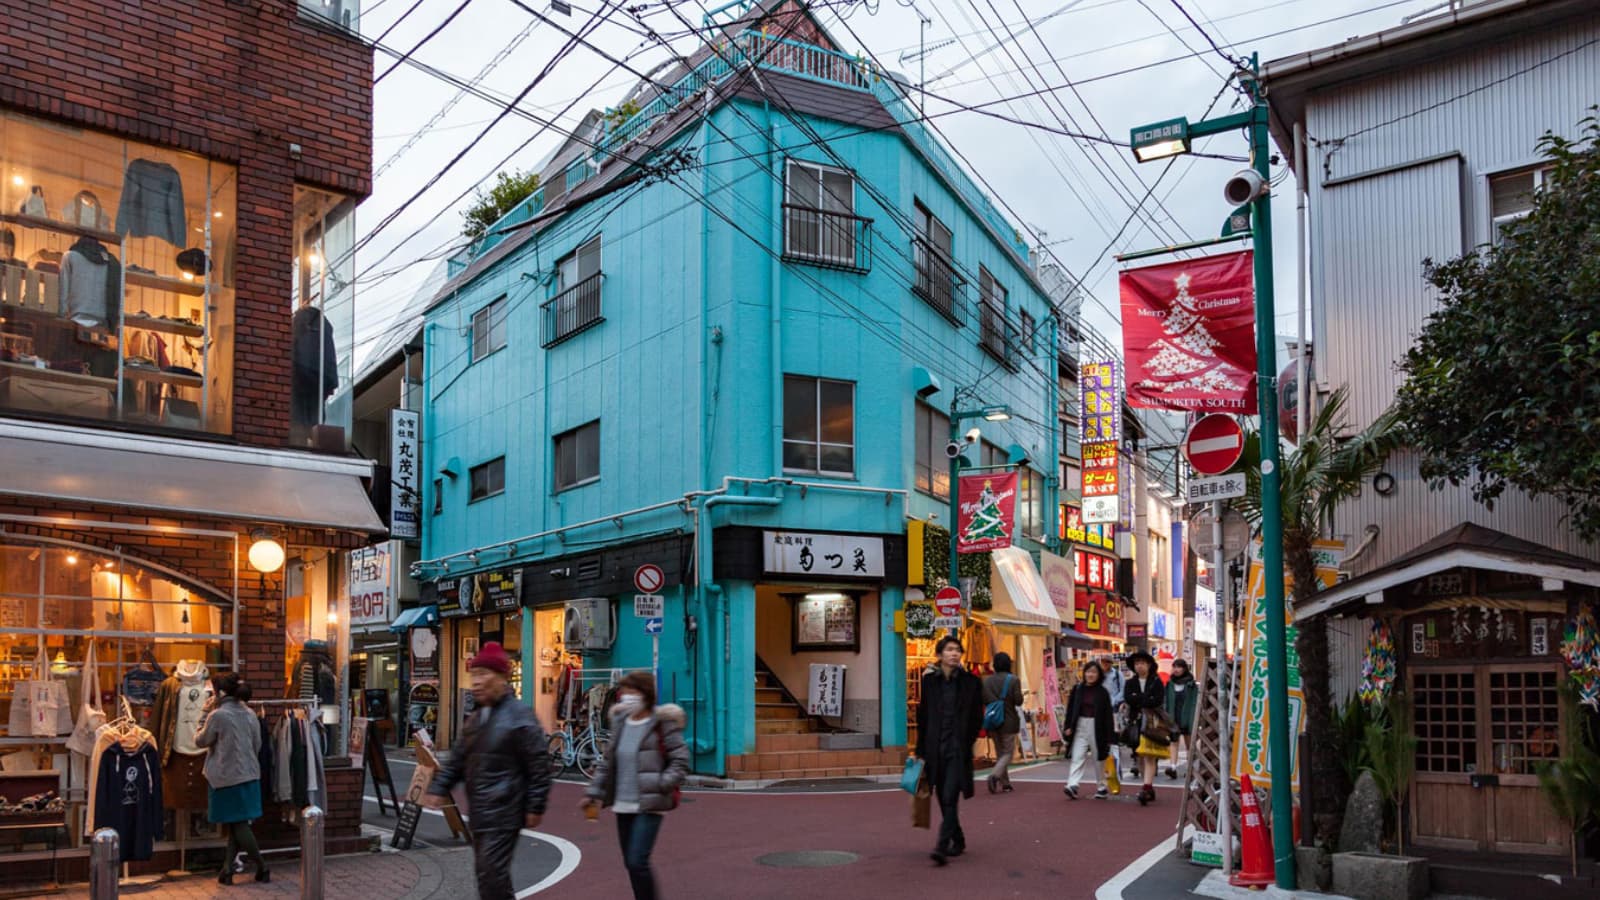 Shimokitazawa, a Bohemian neighborhood packed with hipsters, cafes, bars, music, and thrift shops.